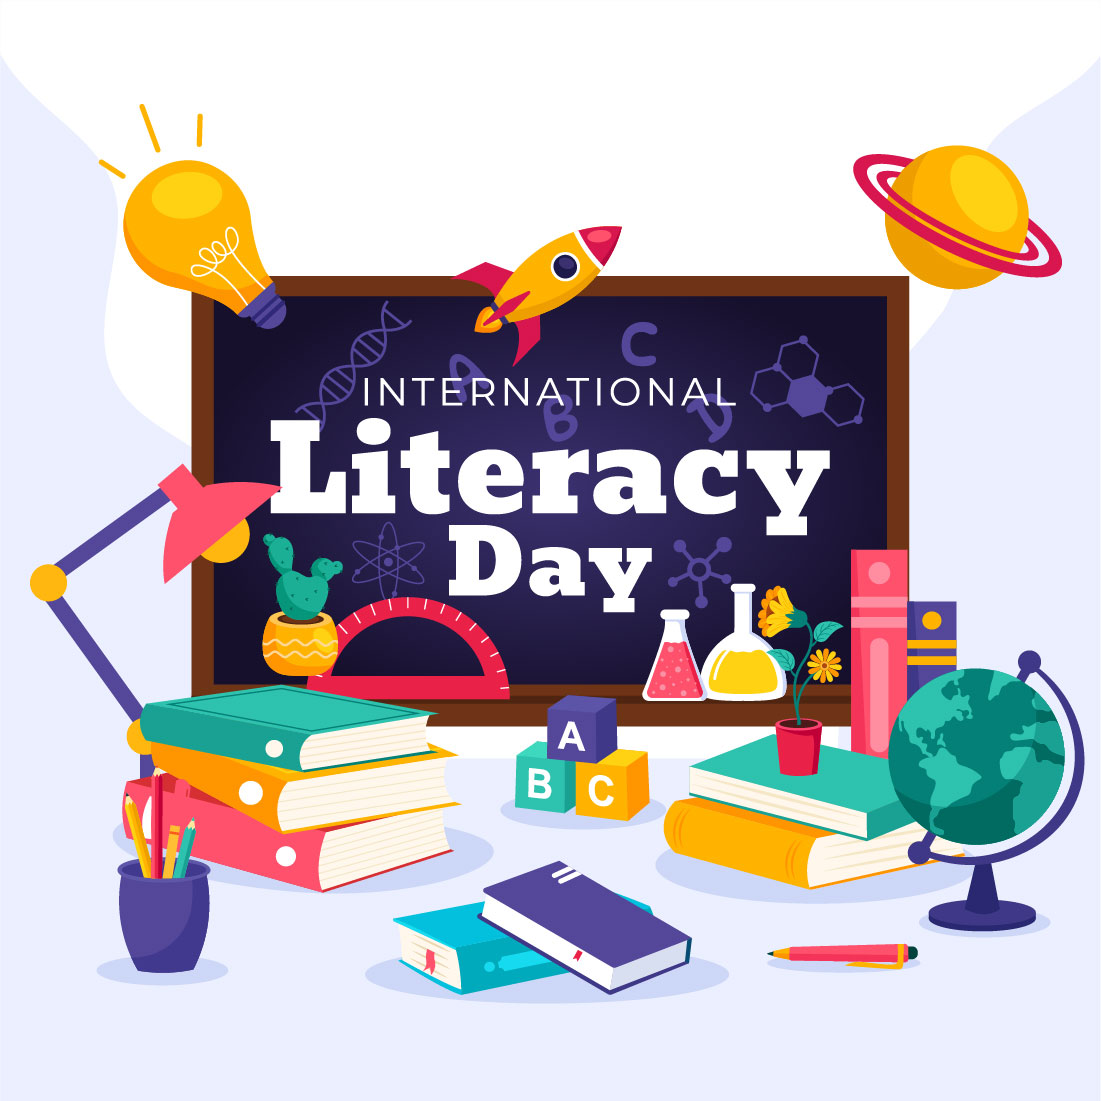 12 International Literacy Day Illustration preview image.